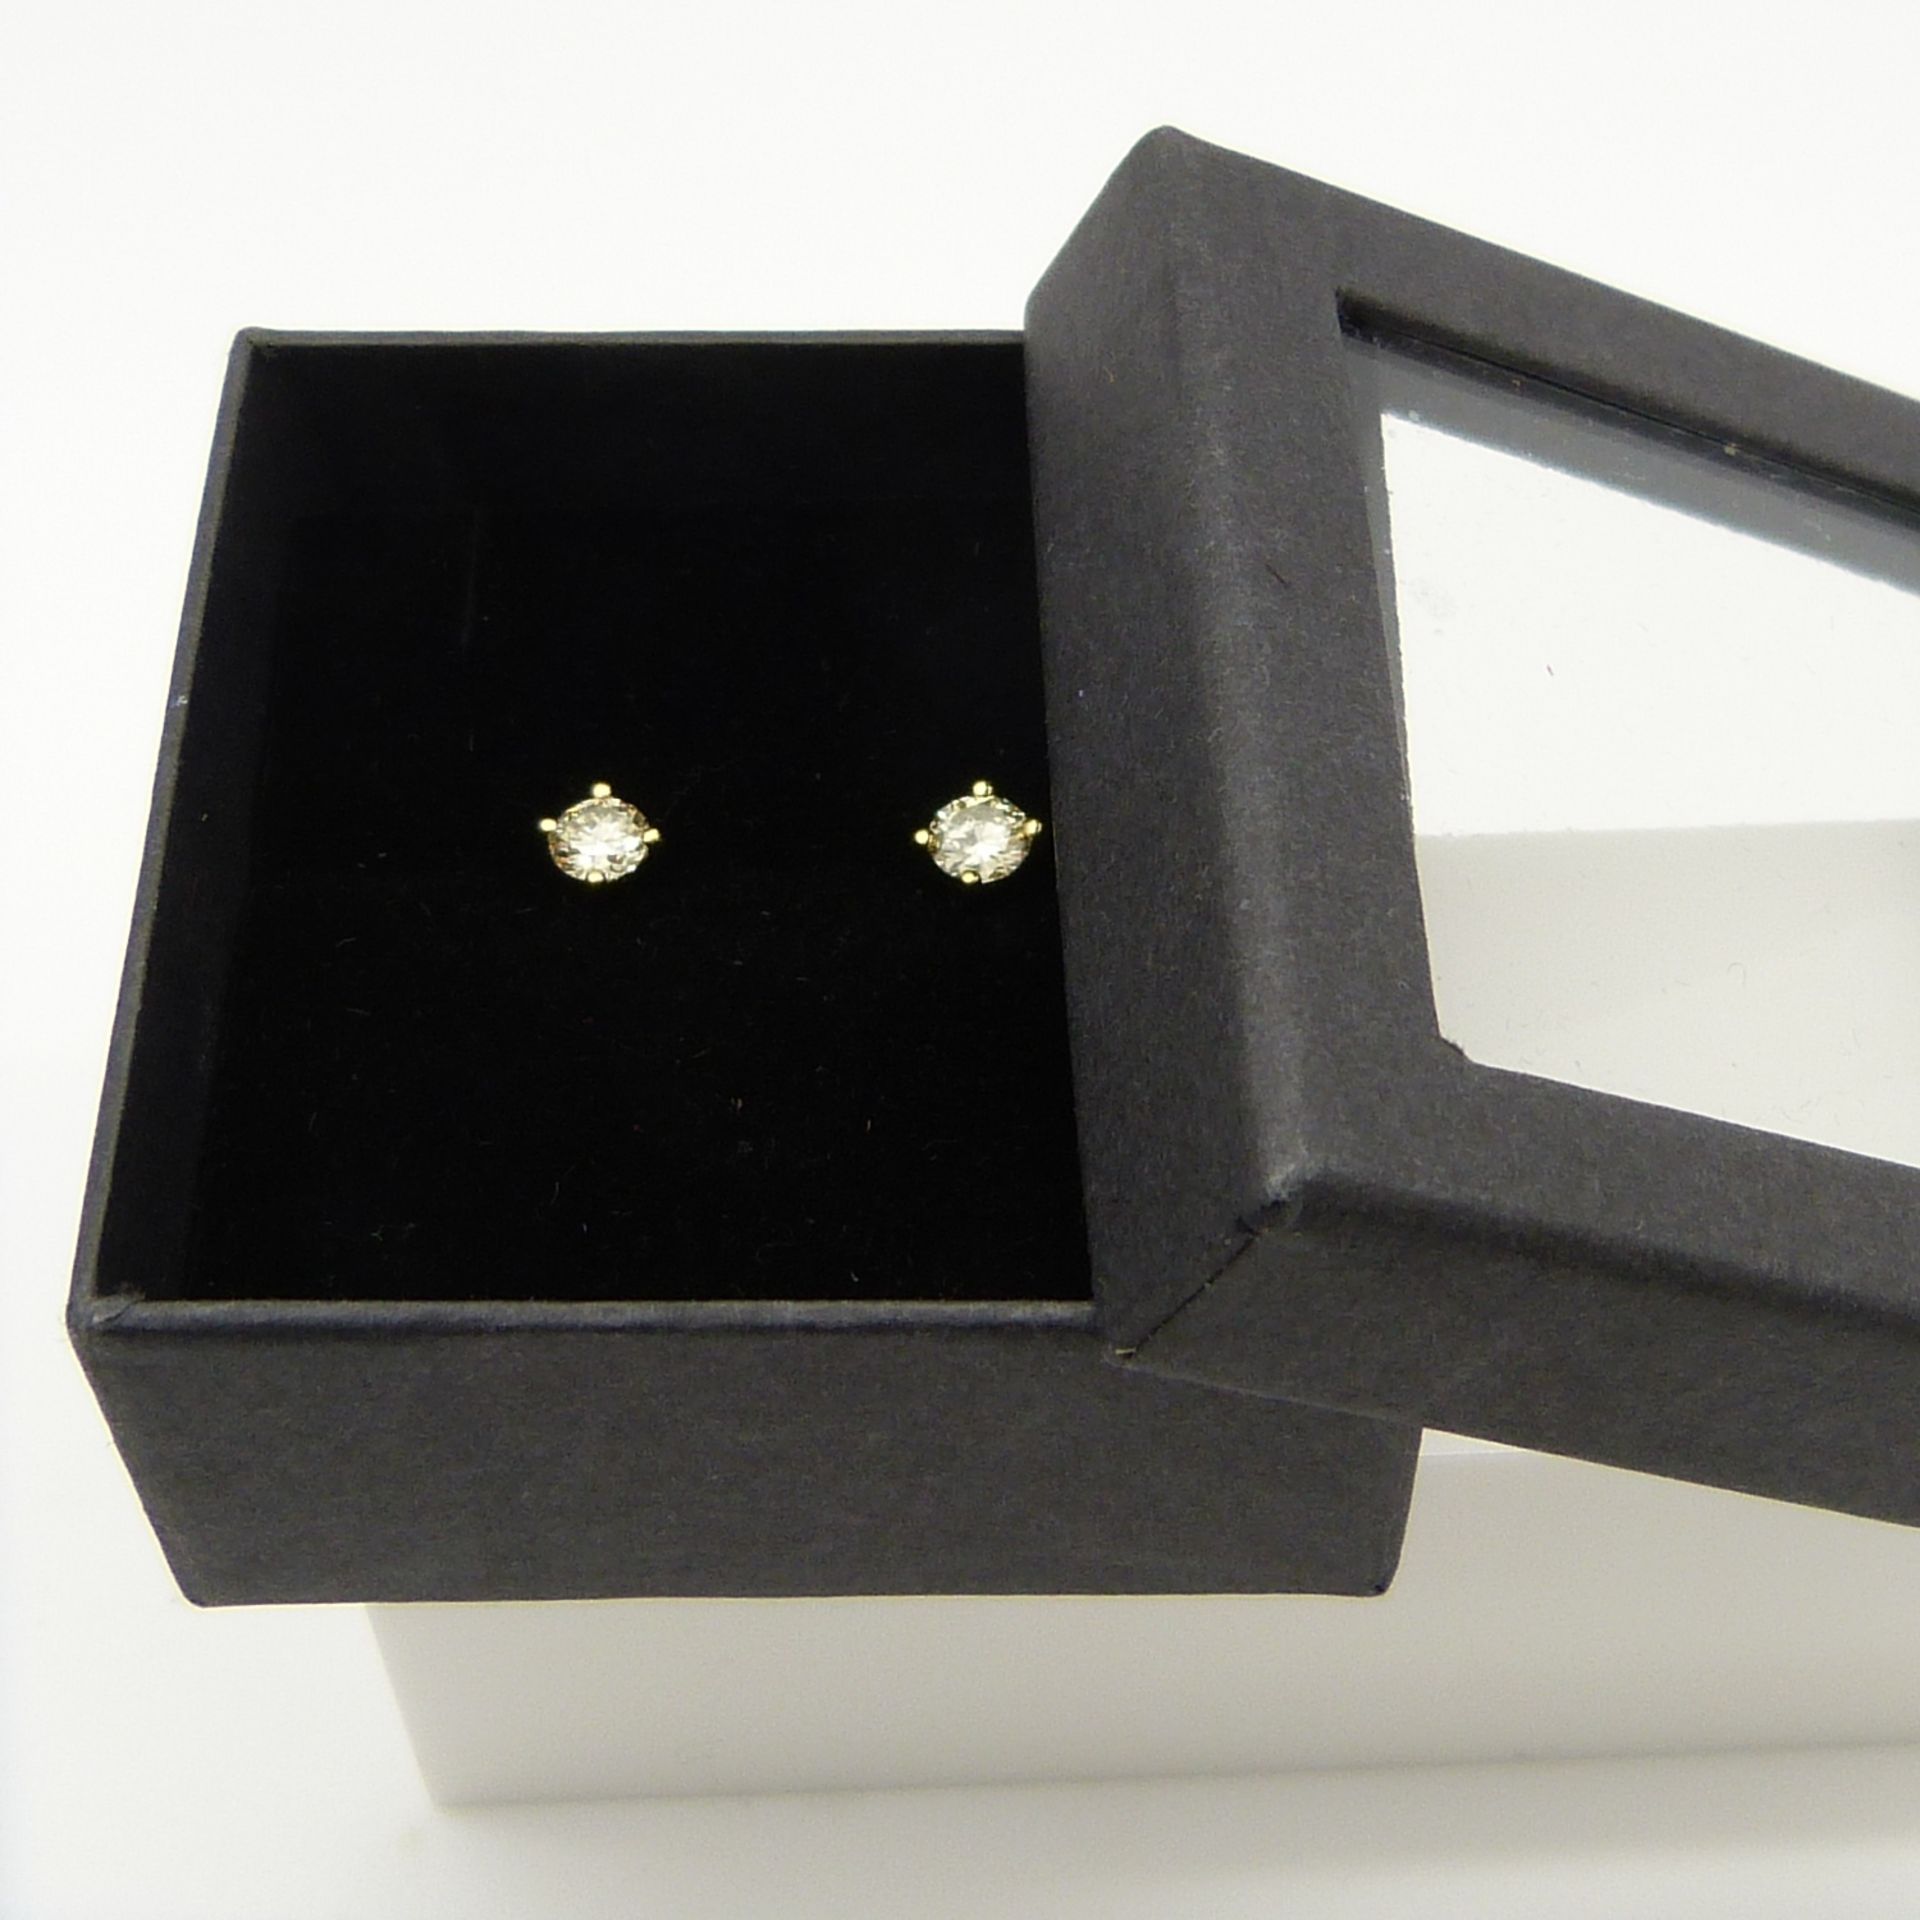 0.51 carat diamond ear studs in 18ct yellow gold, boxed - Image 3 of 6